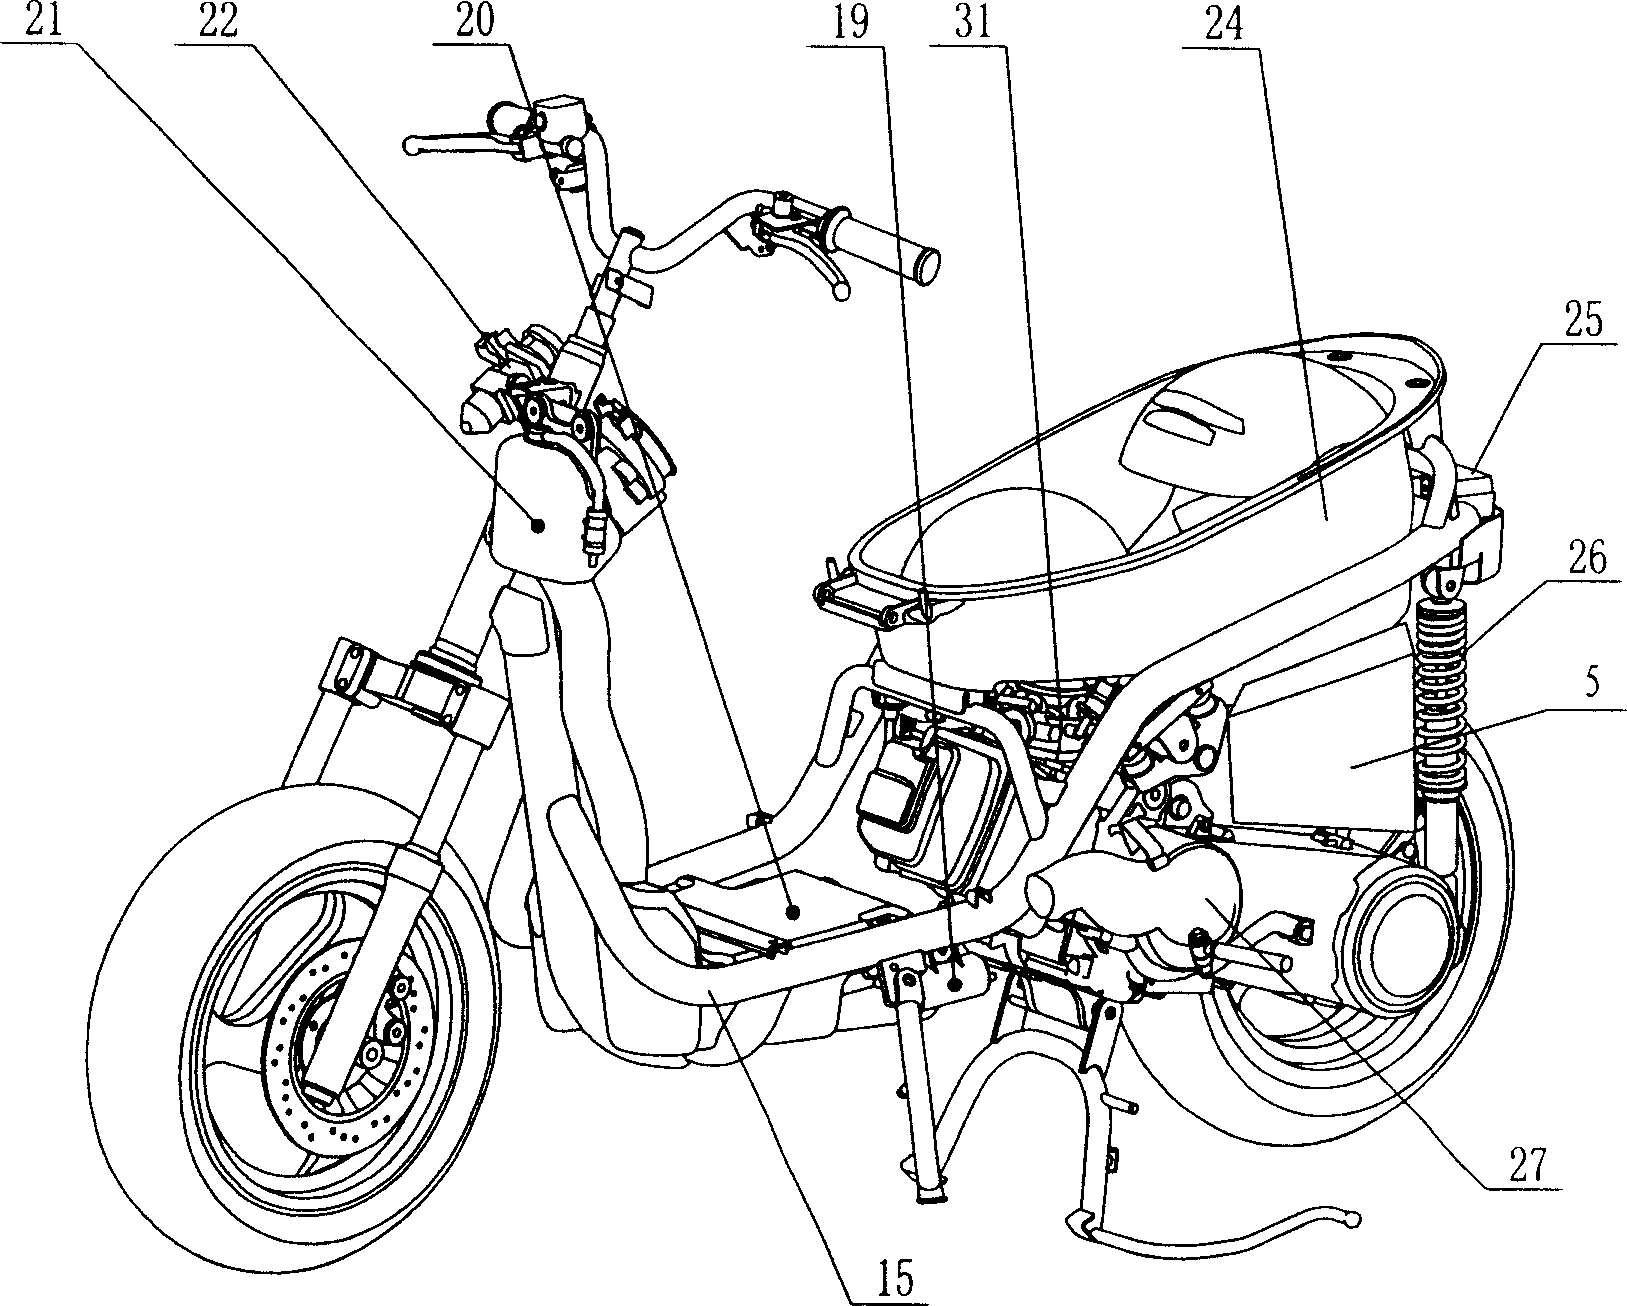 Pedal type motorcycle